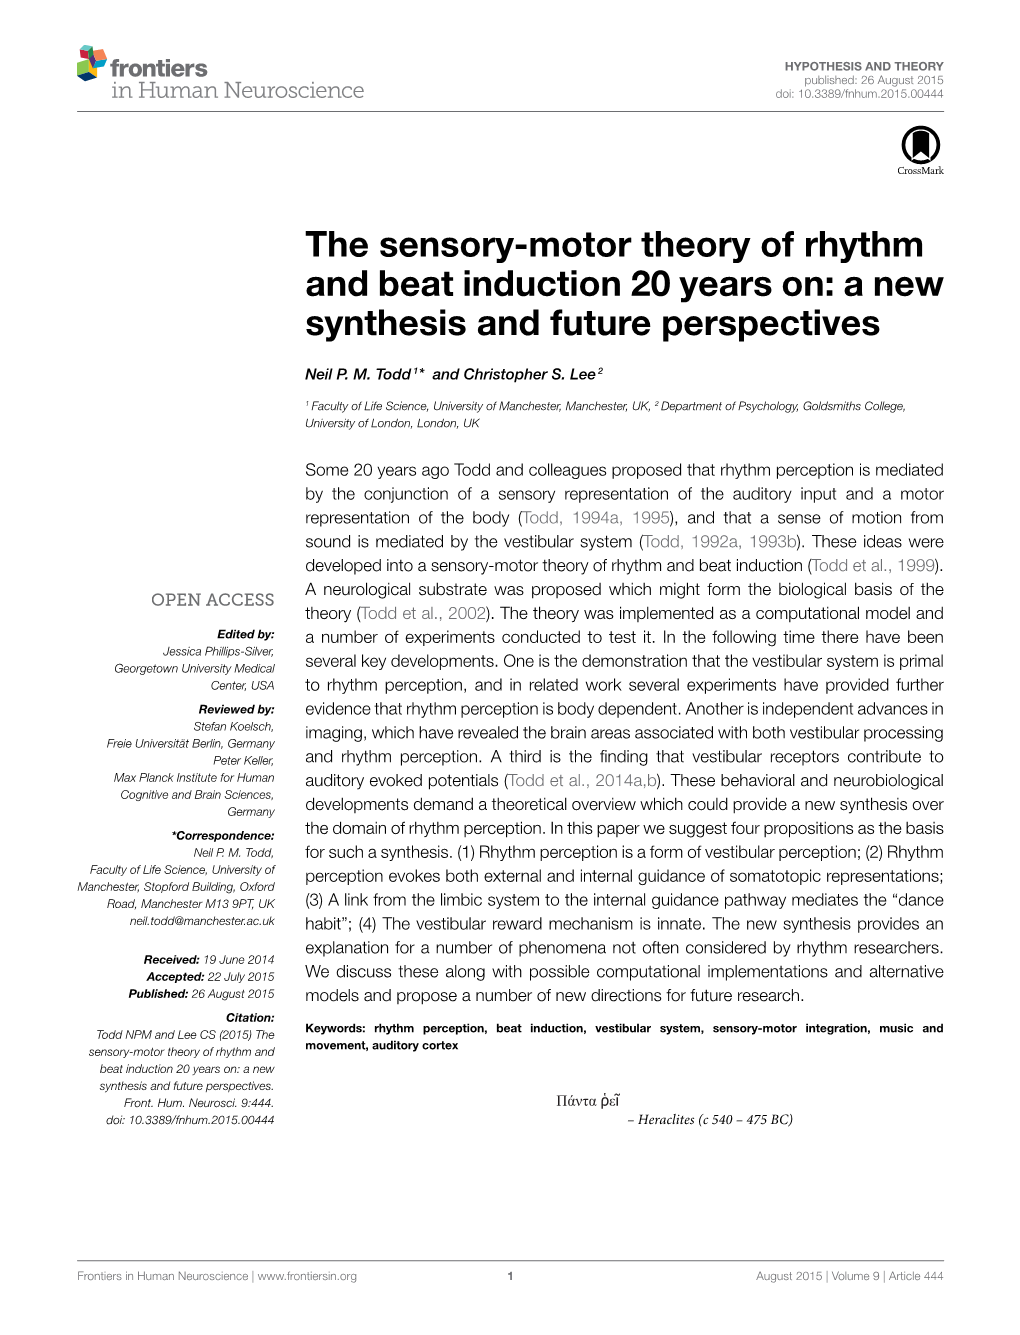 The Sensory-Motor Theory of Rhythm and Beat Induction 20 Years On: a New Synthesis and Future Perspectives